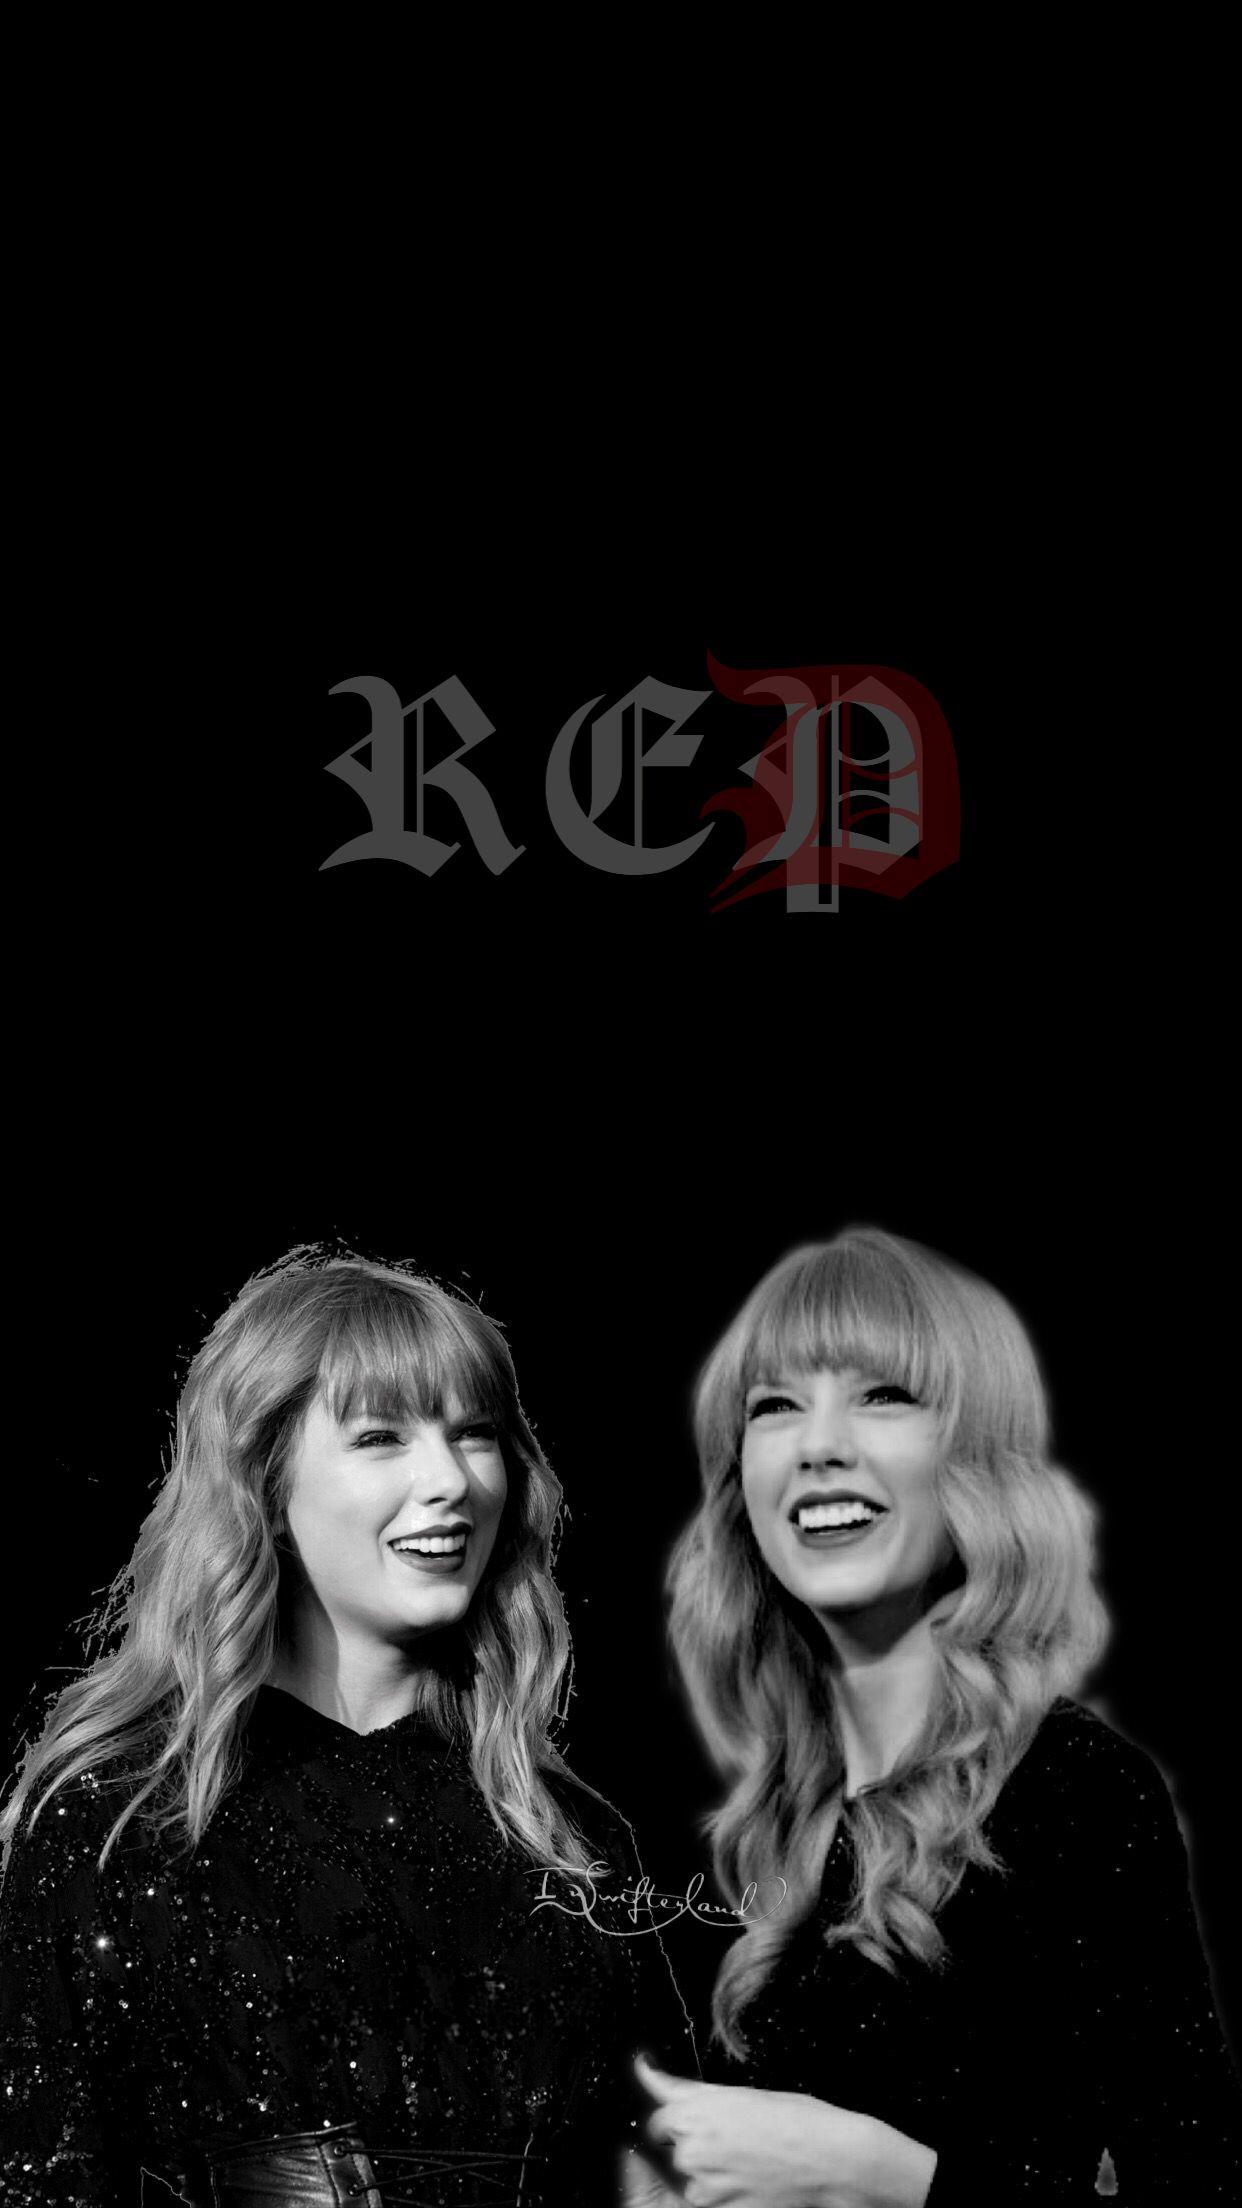 REP. RED Wallpaper. Taylor Swift. Taylor Swift, Taylor